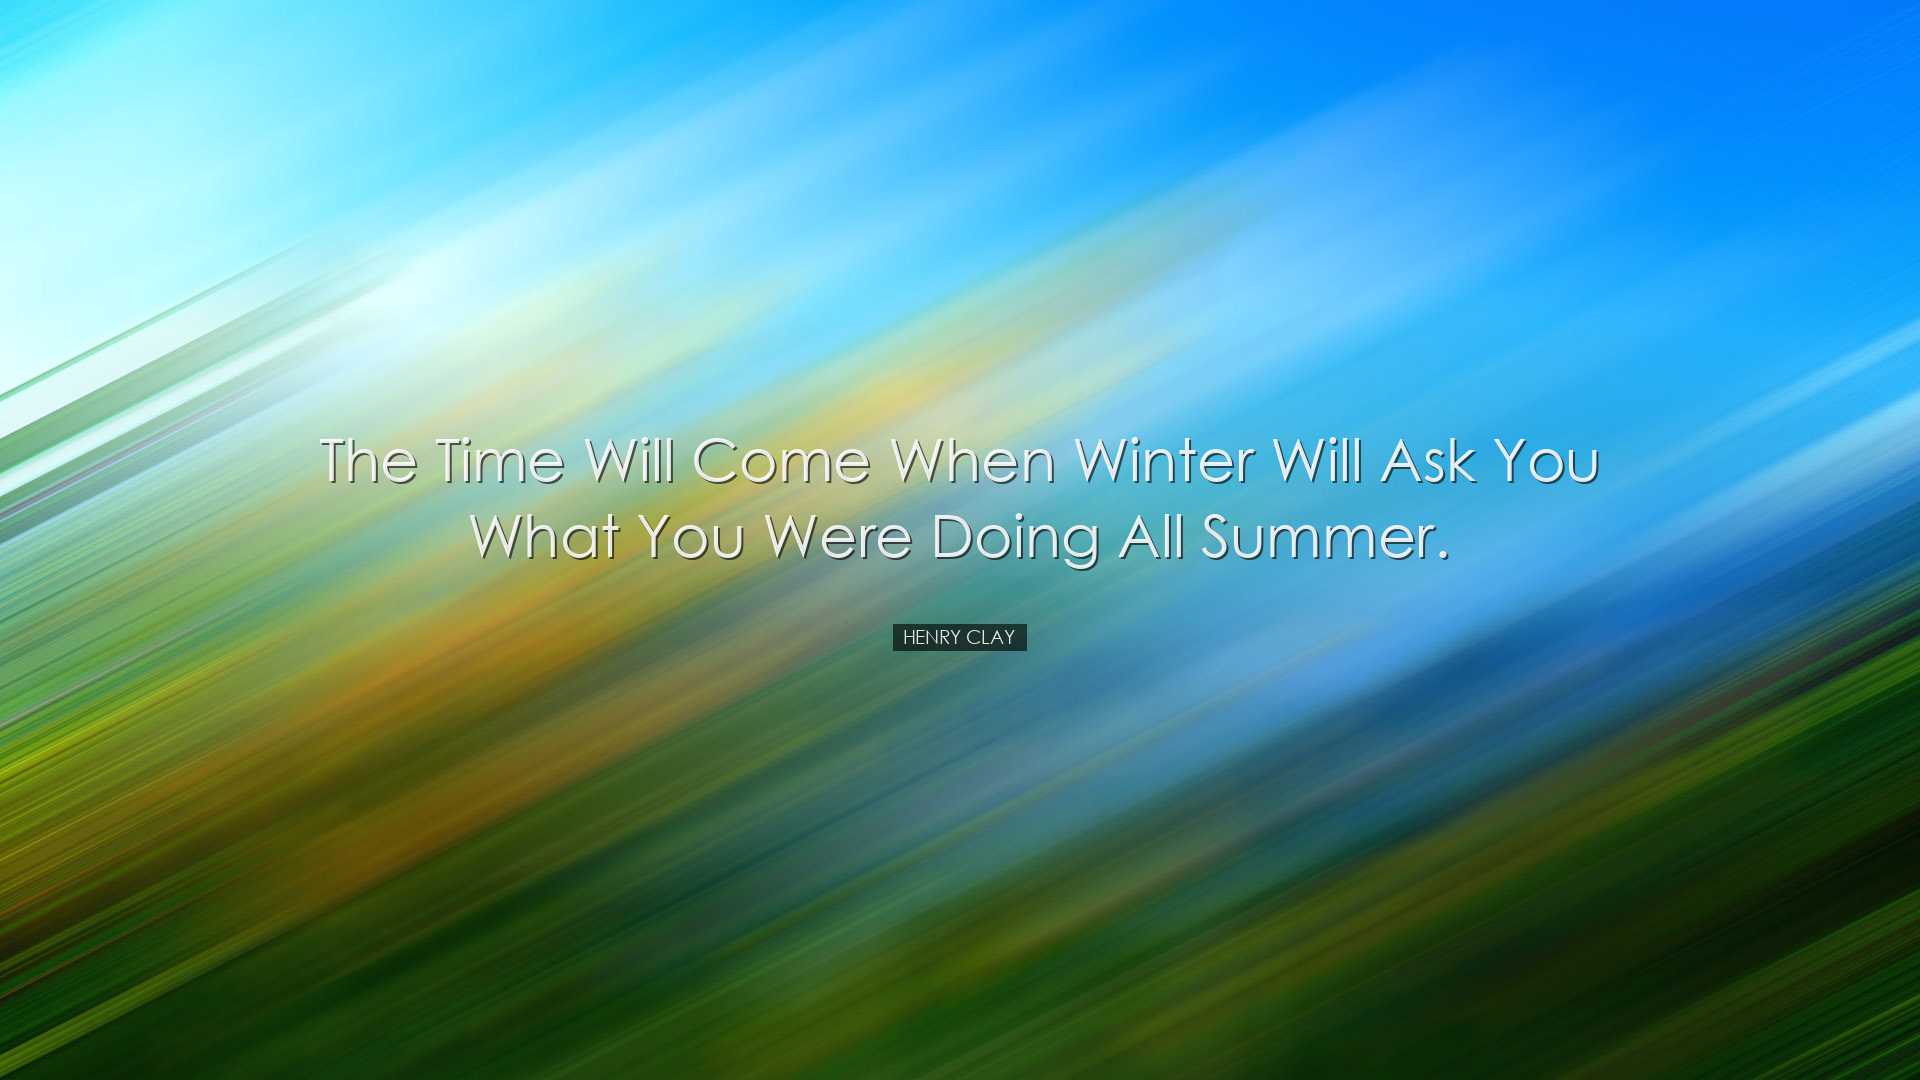 The time will come when winter will ask you what you were doing al